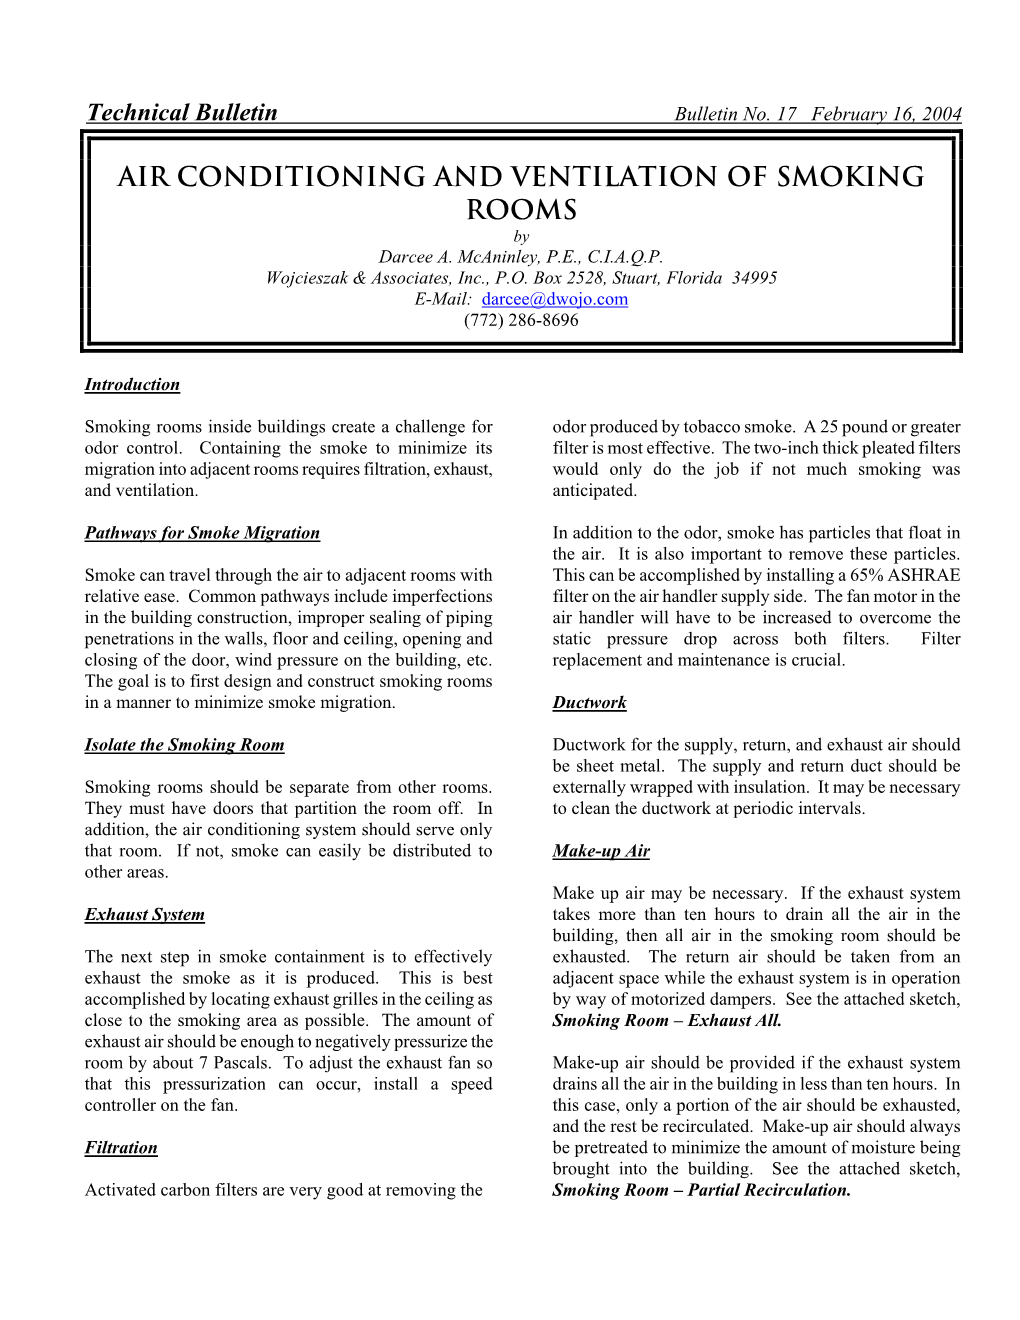 Air Conditioning and Ventilation of Smoking Rooms by Darcee A